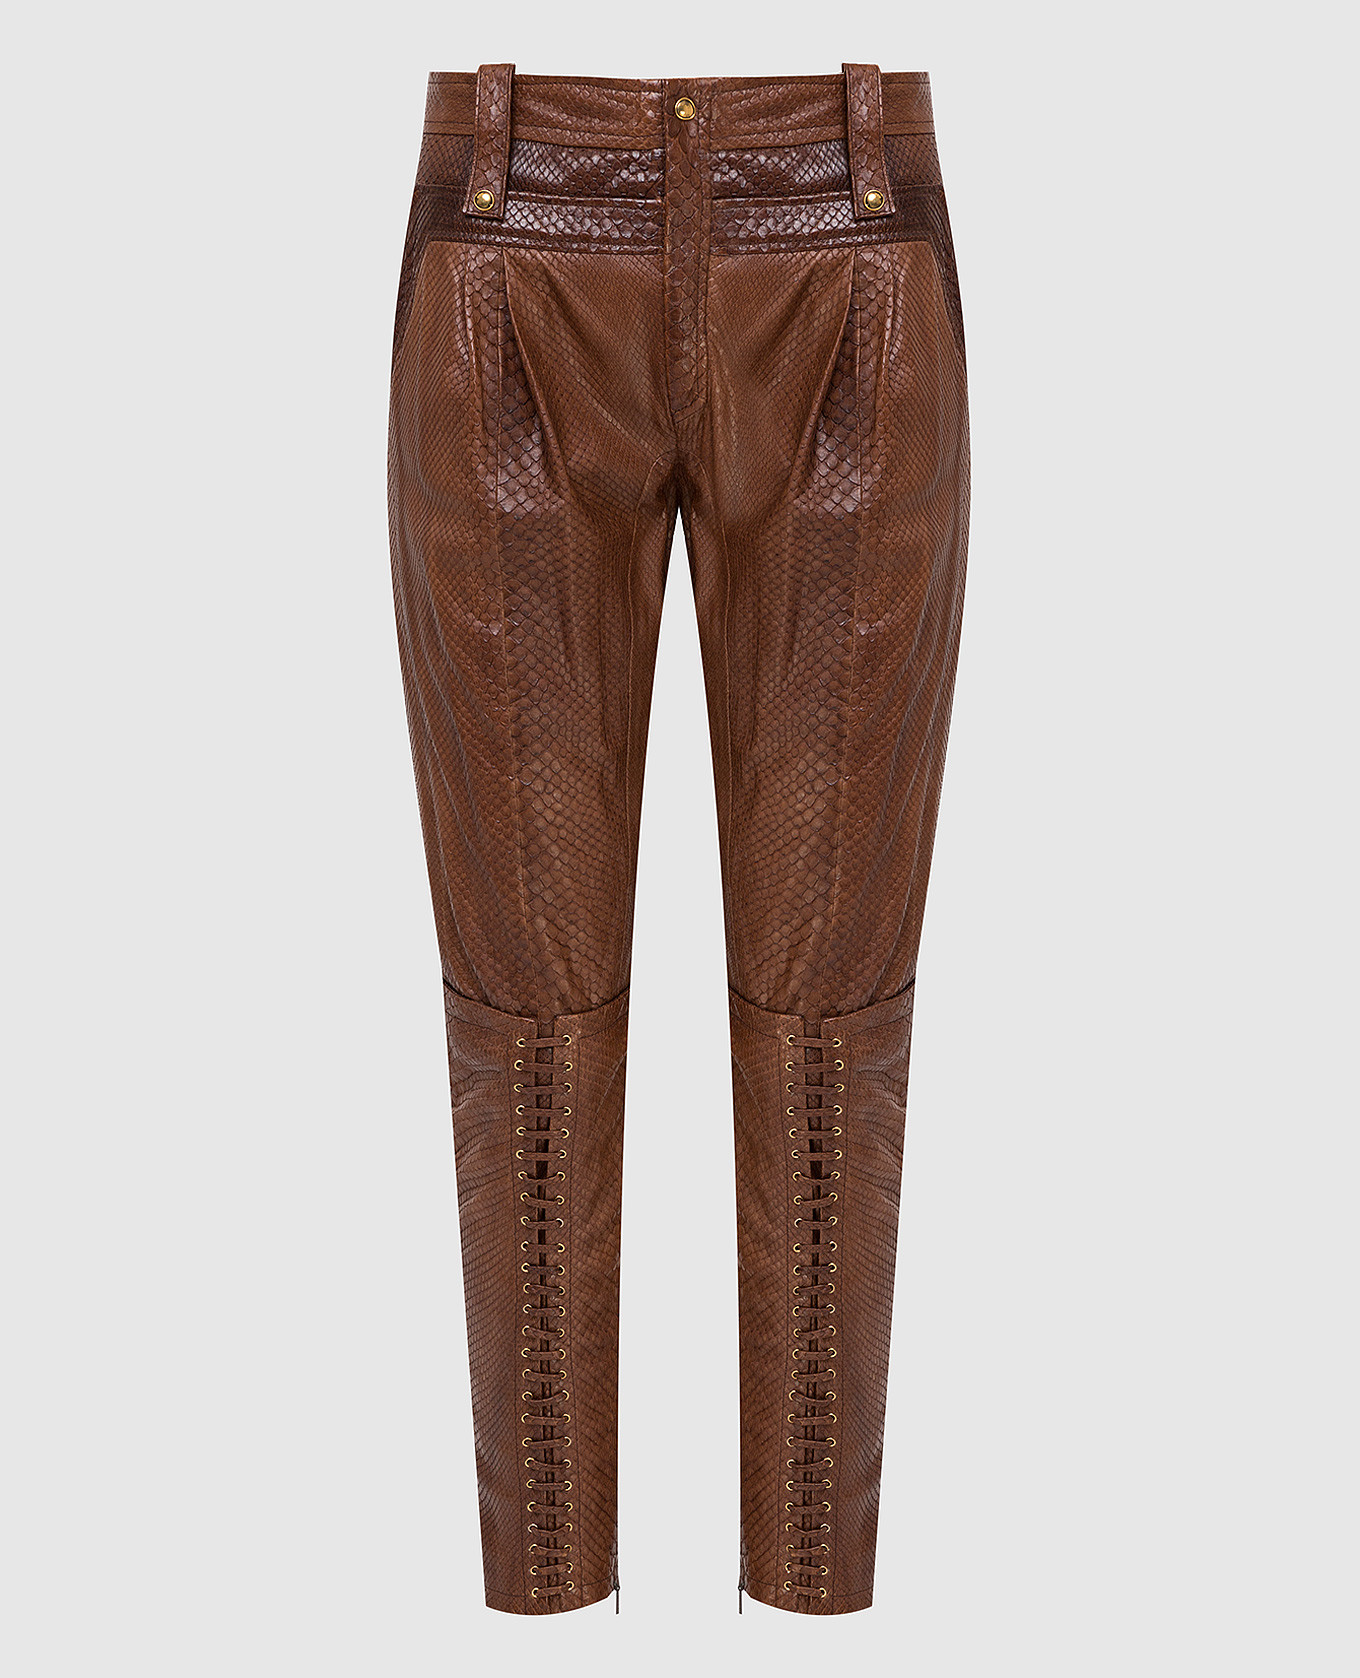 Brown python skin trousers